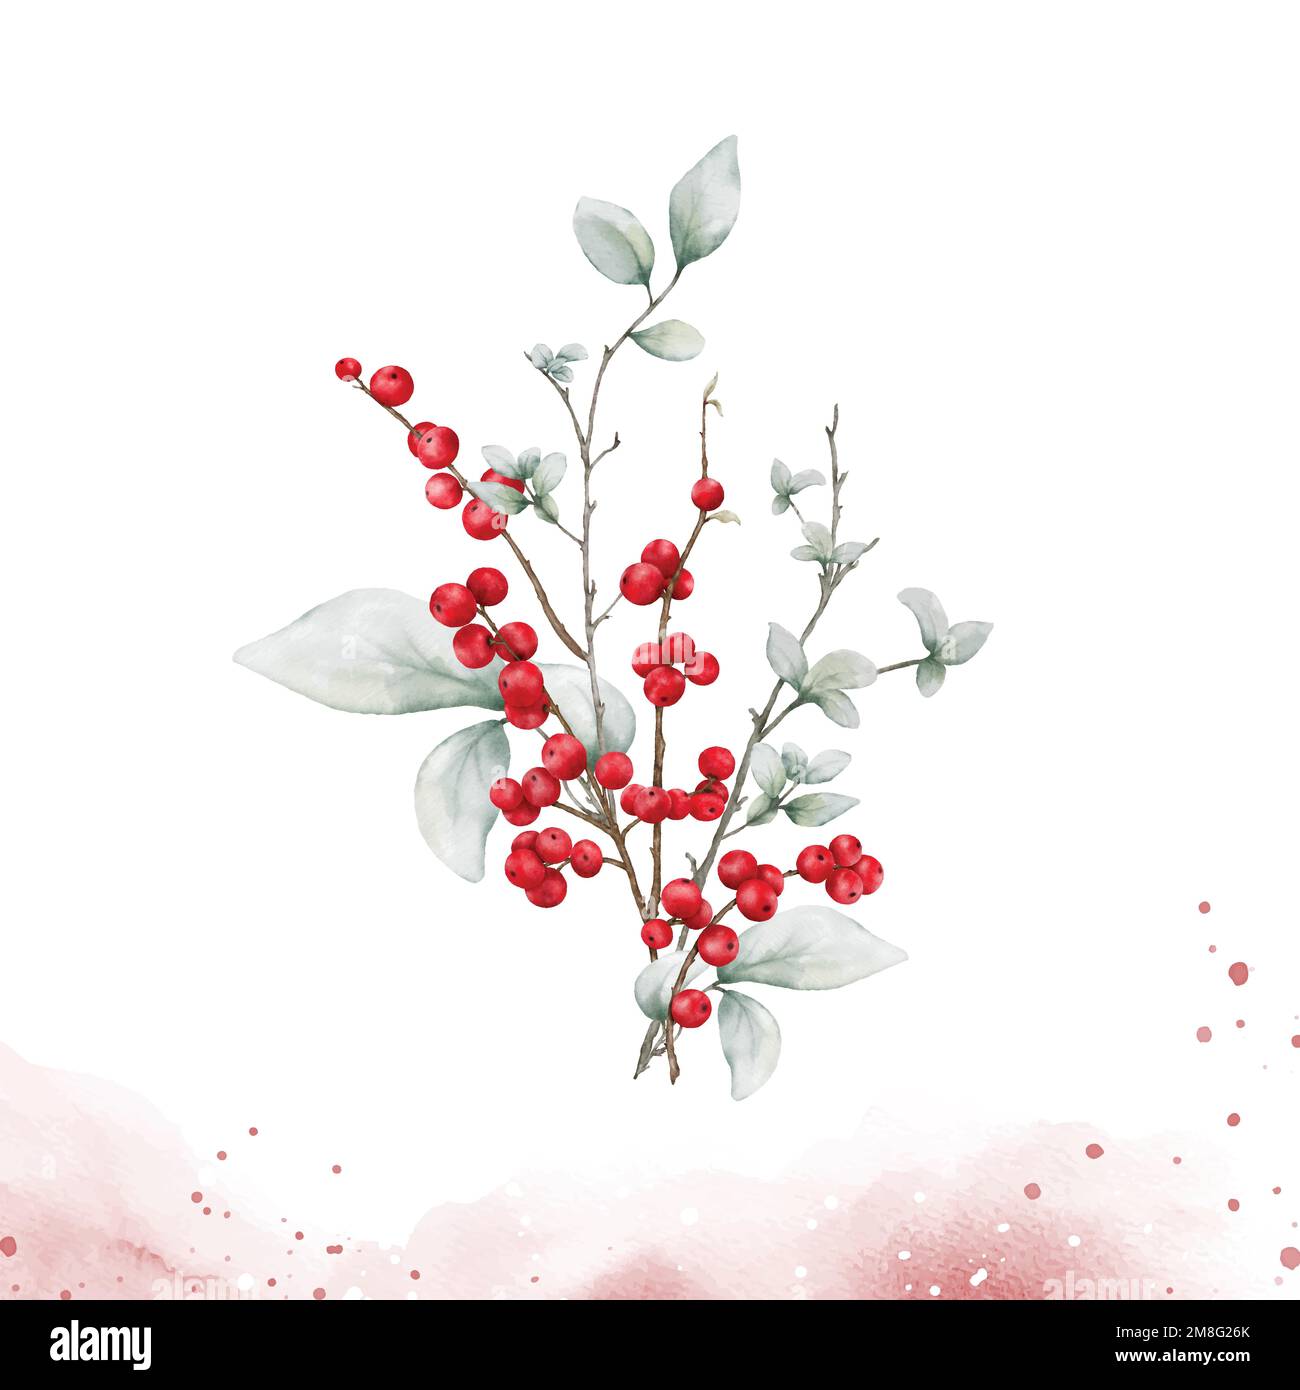 watercolor bouquet of berries branches on splash stain background. elements suitable for decorative Christmas festivals, Winter, New year invitations, Stock Vector